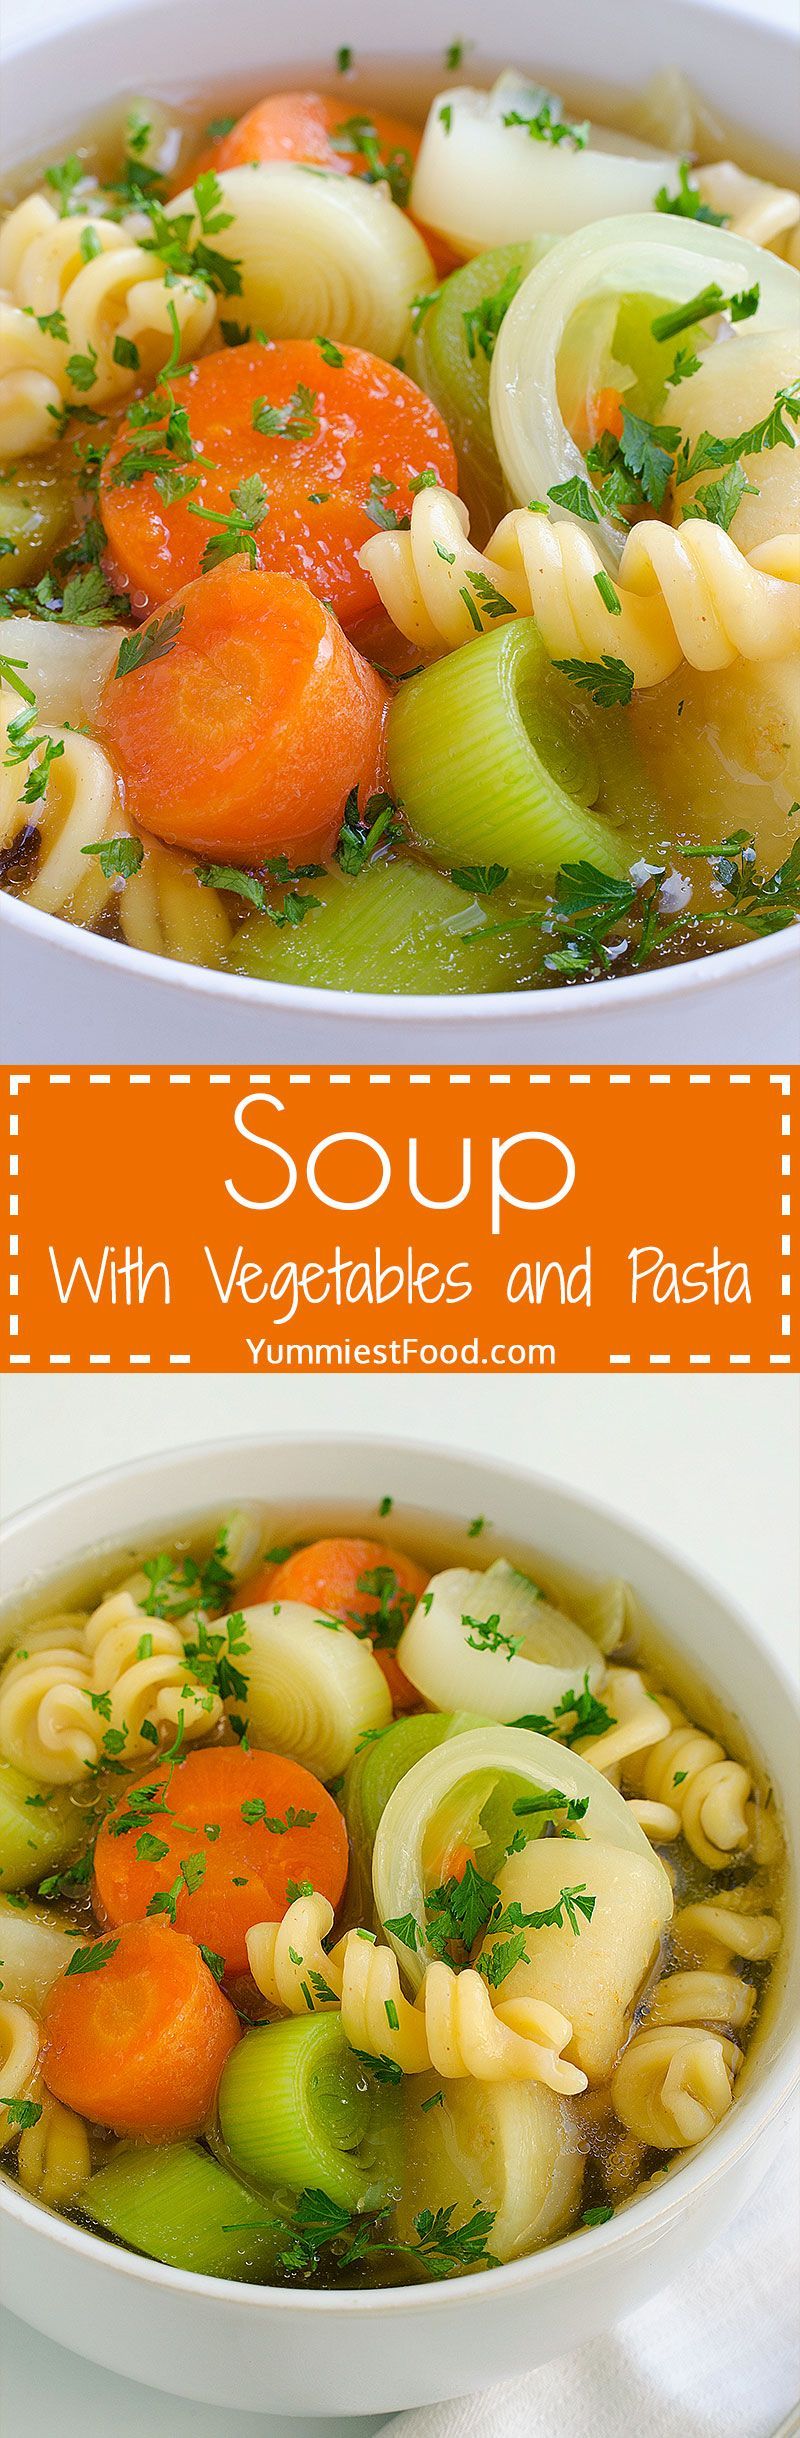 Soup With Vegetables and Pasta – This soup with vegetables and pasta is very healthy and your family is sure to love it from the